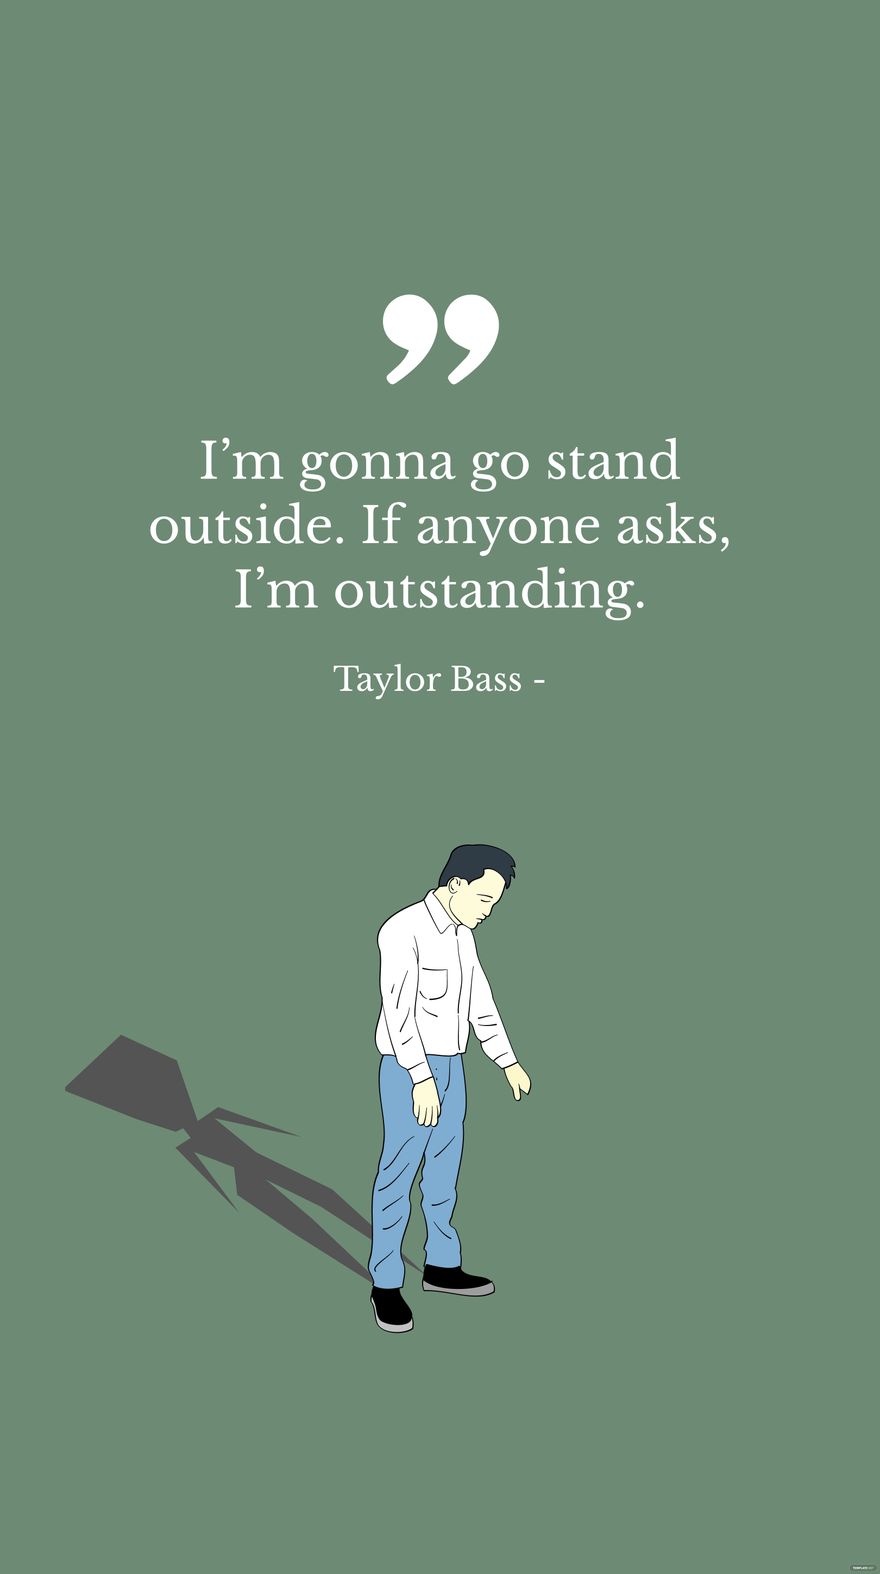 Taylor Bass - I’m gonna go stand outside. If anyone asks, I’m outstanding.